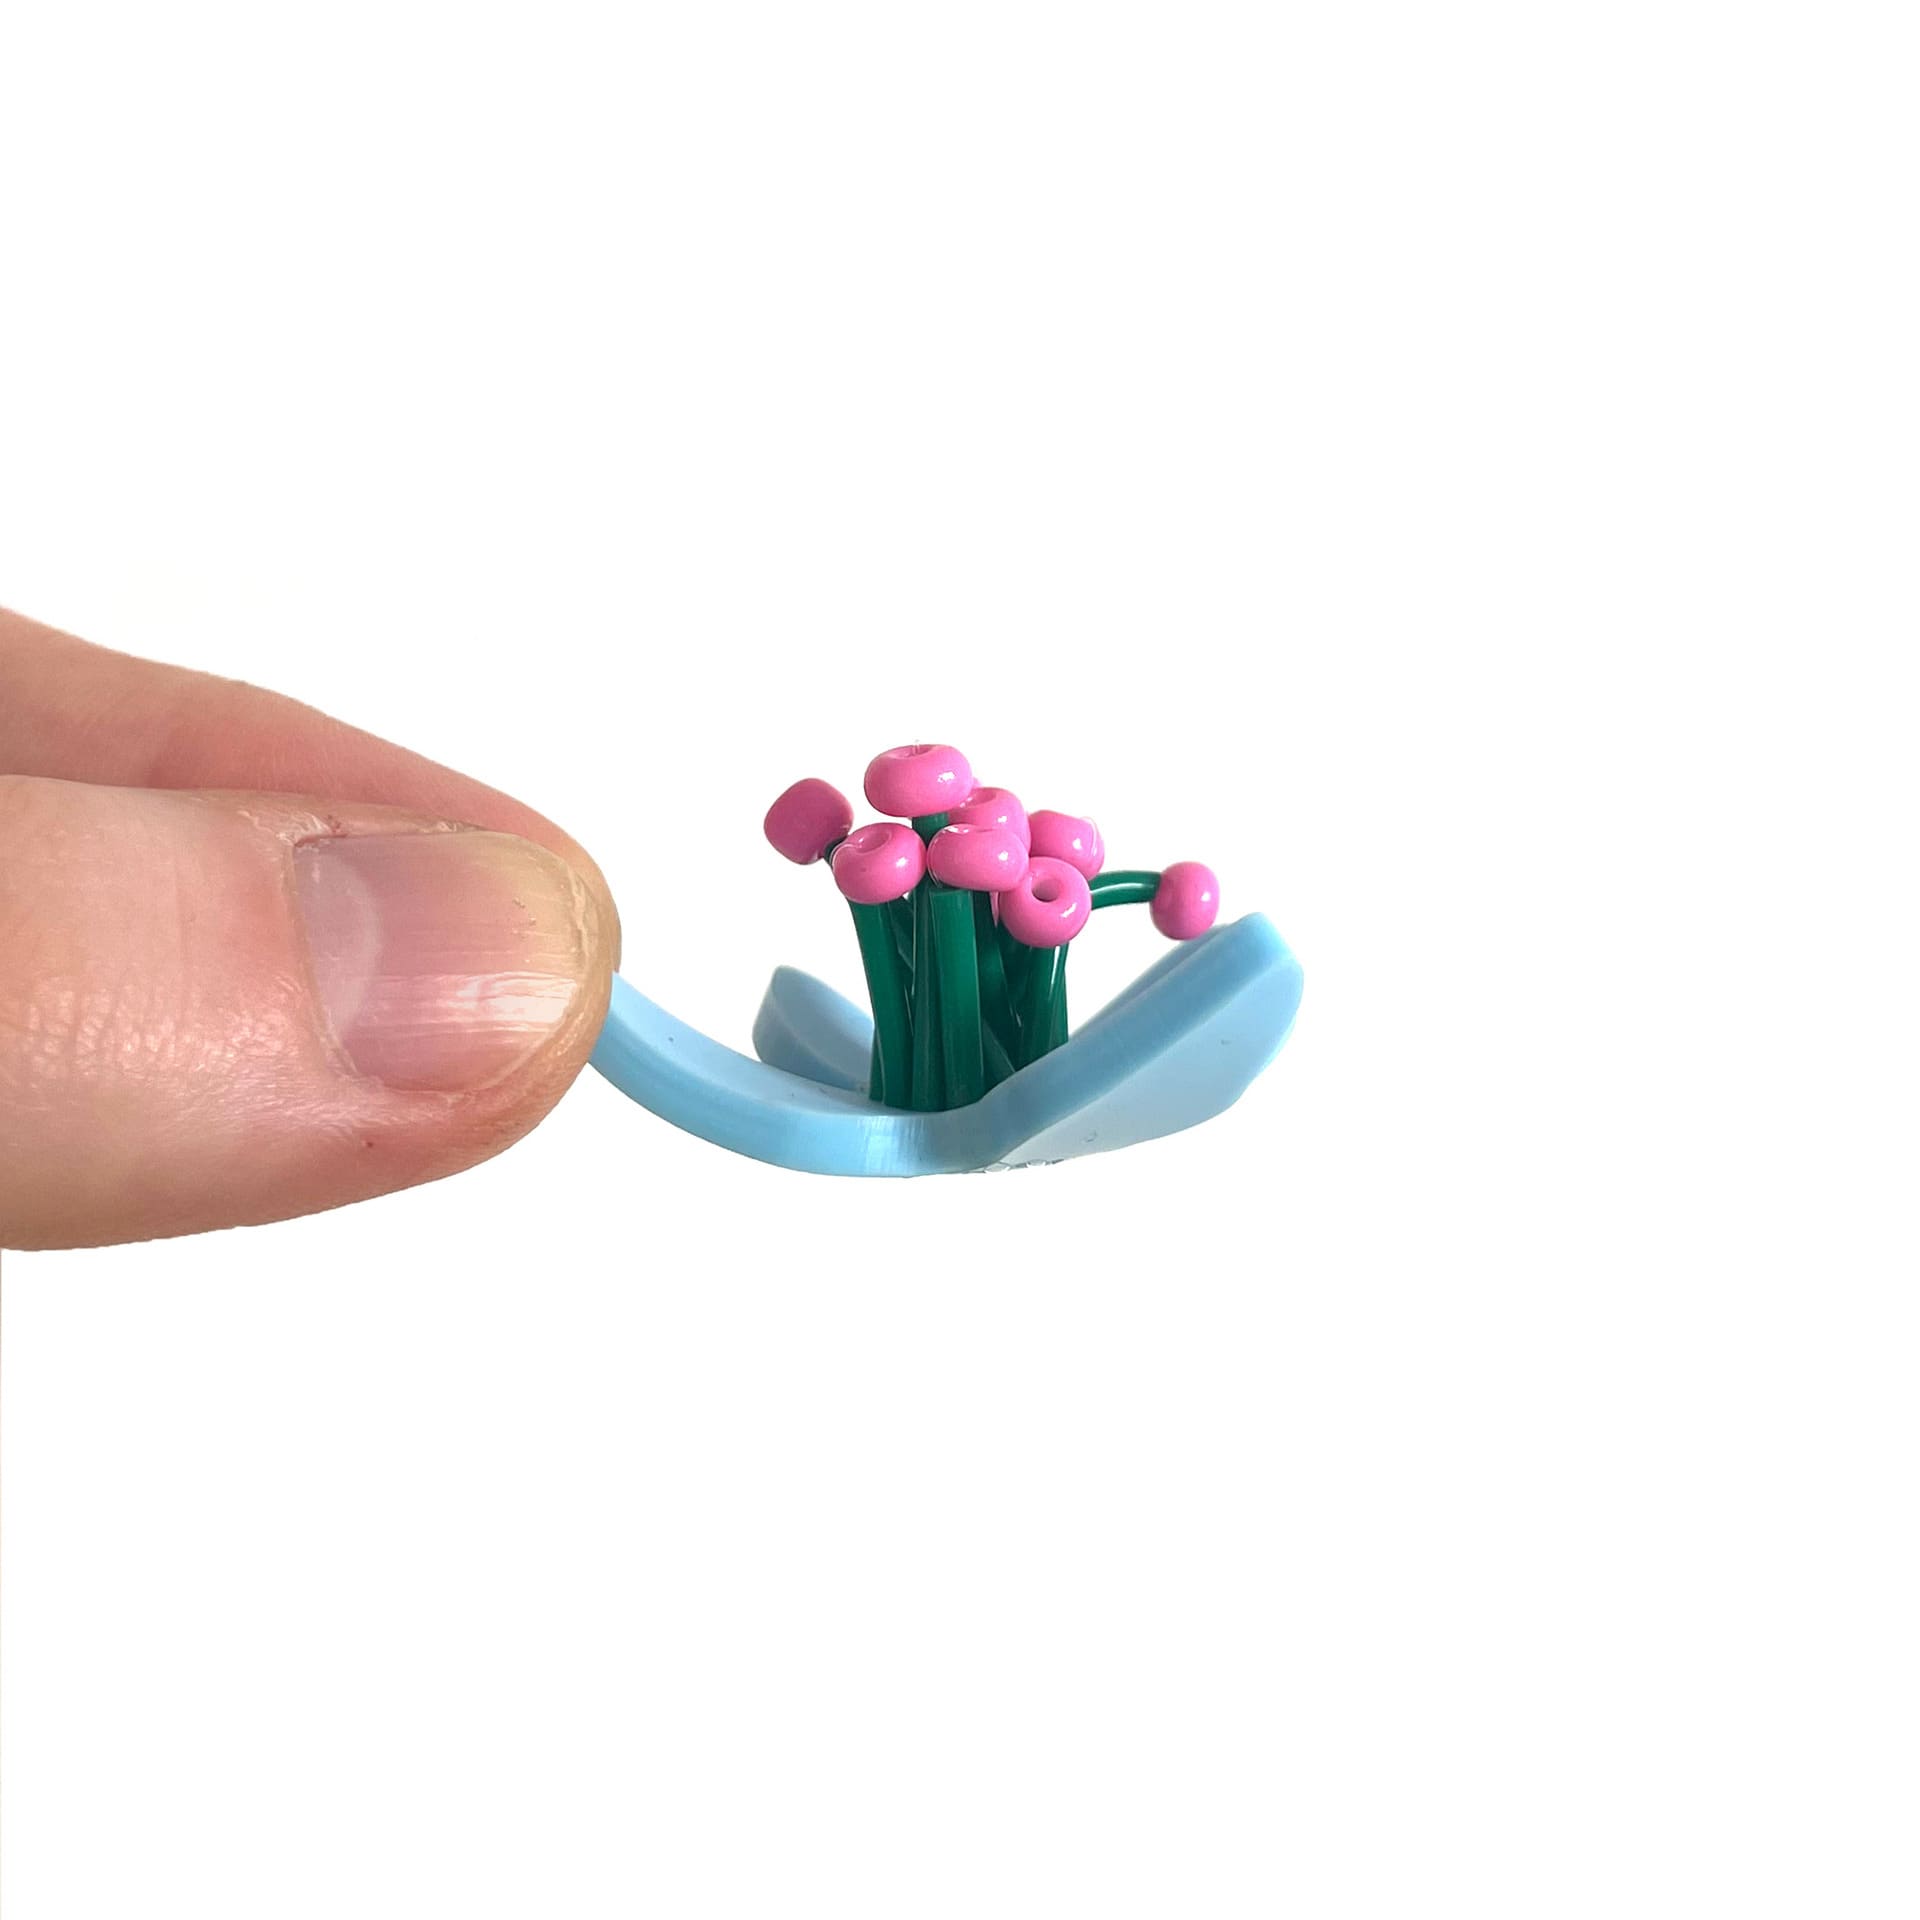 Flower plastic model held between two fingers on a white background. The petals are baby blue with added green embellishment.